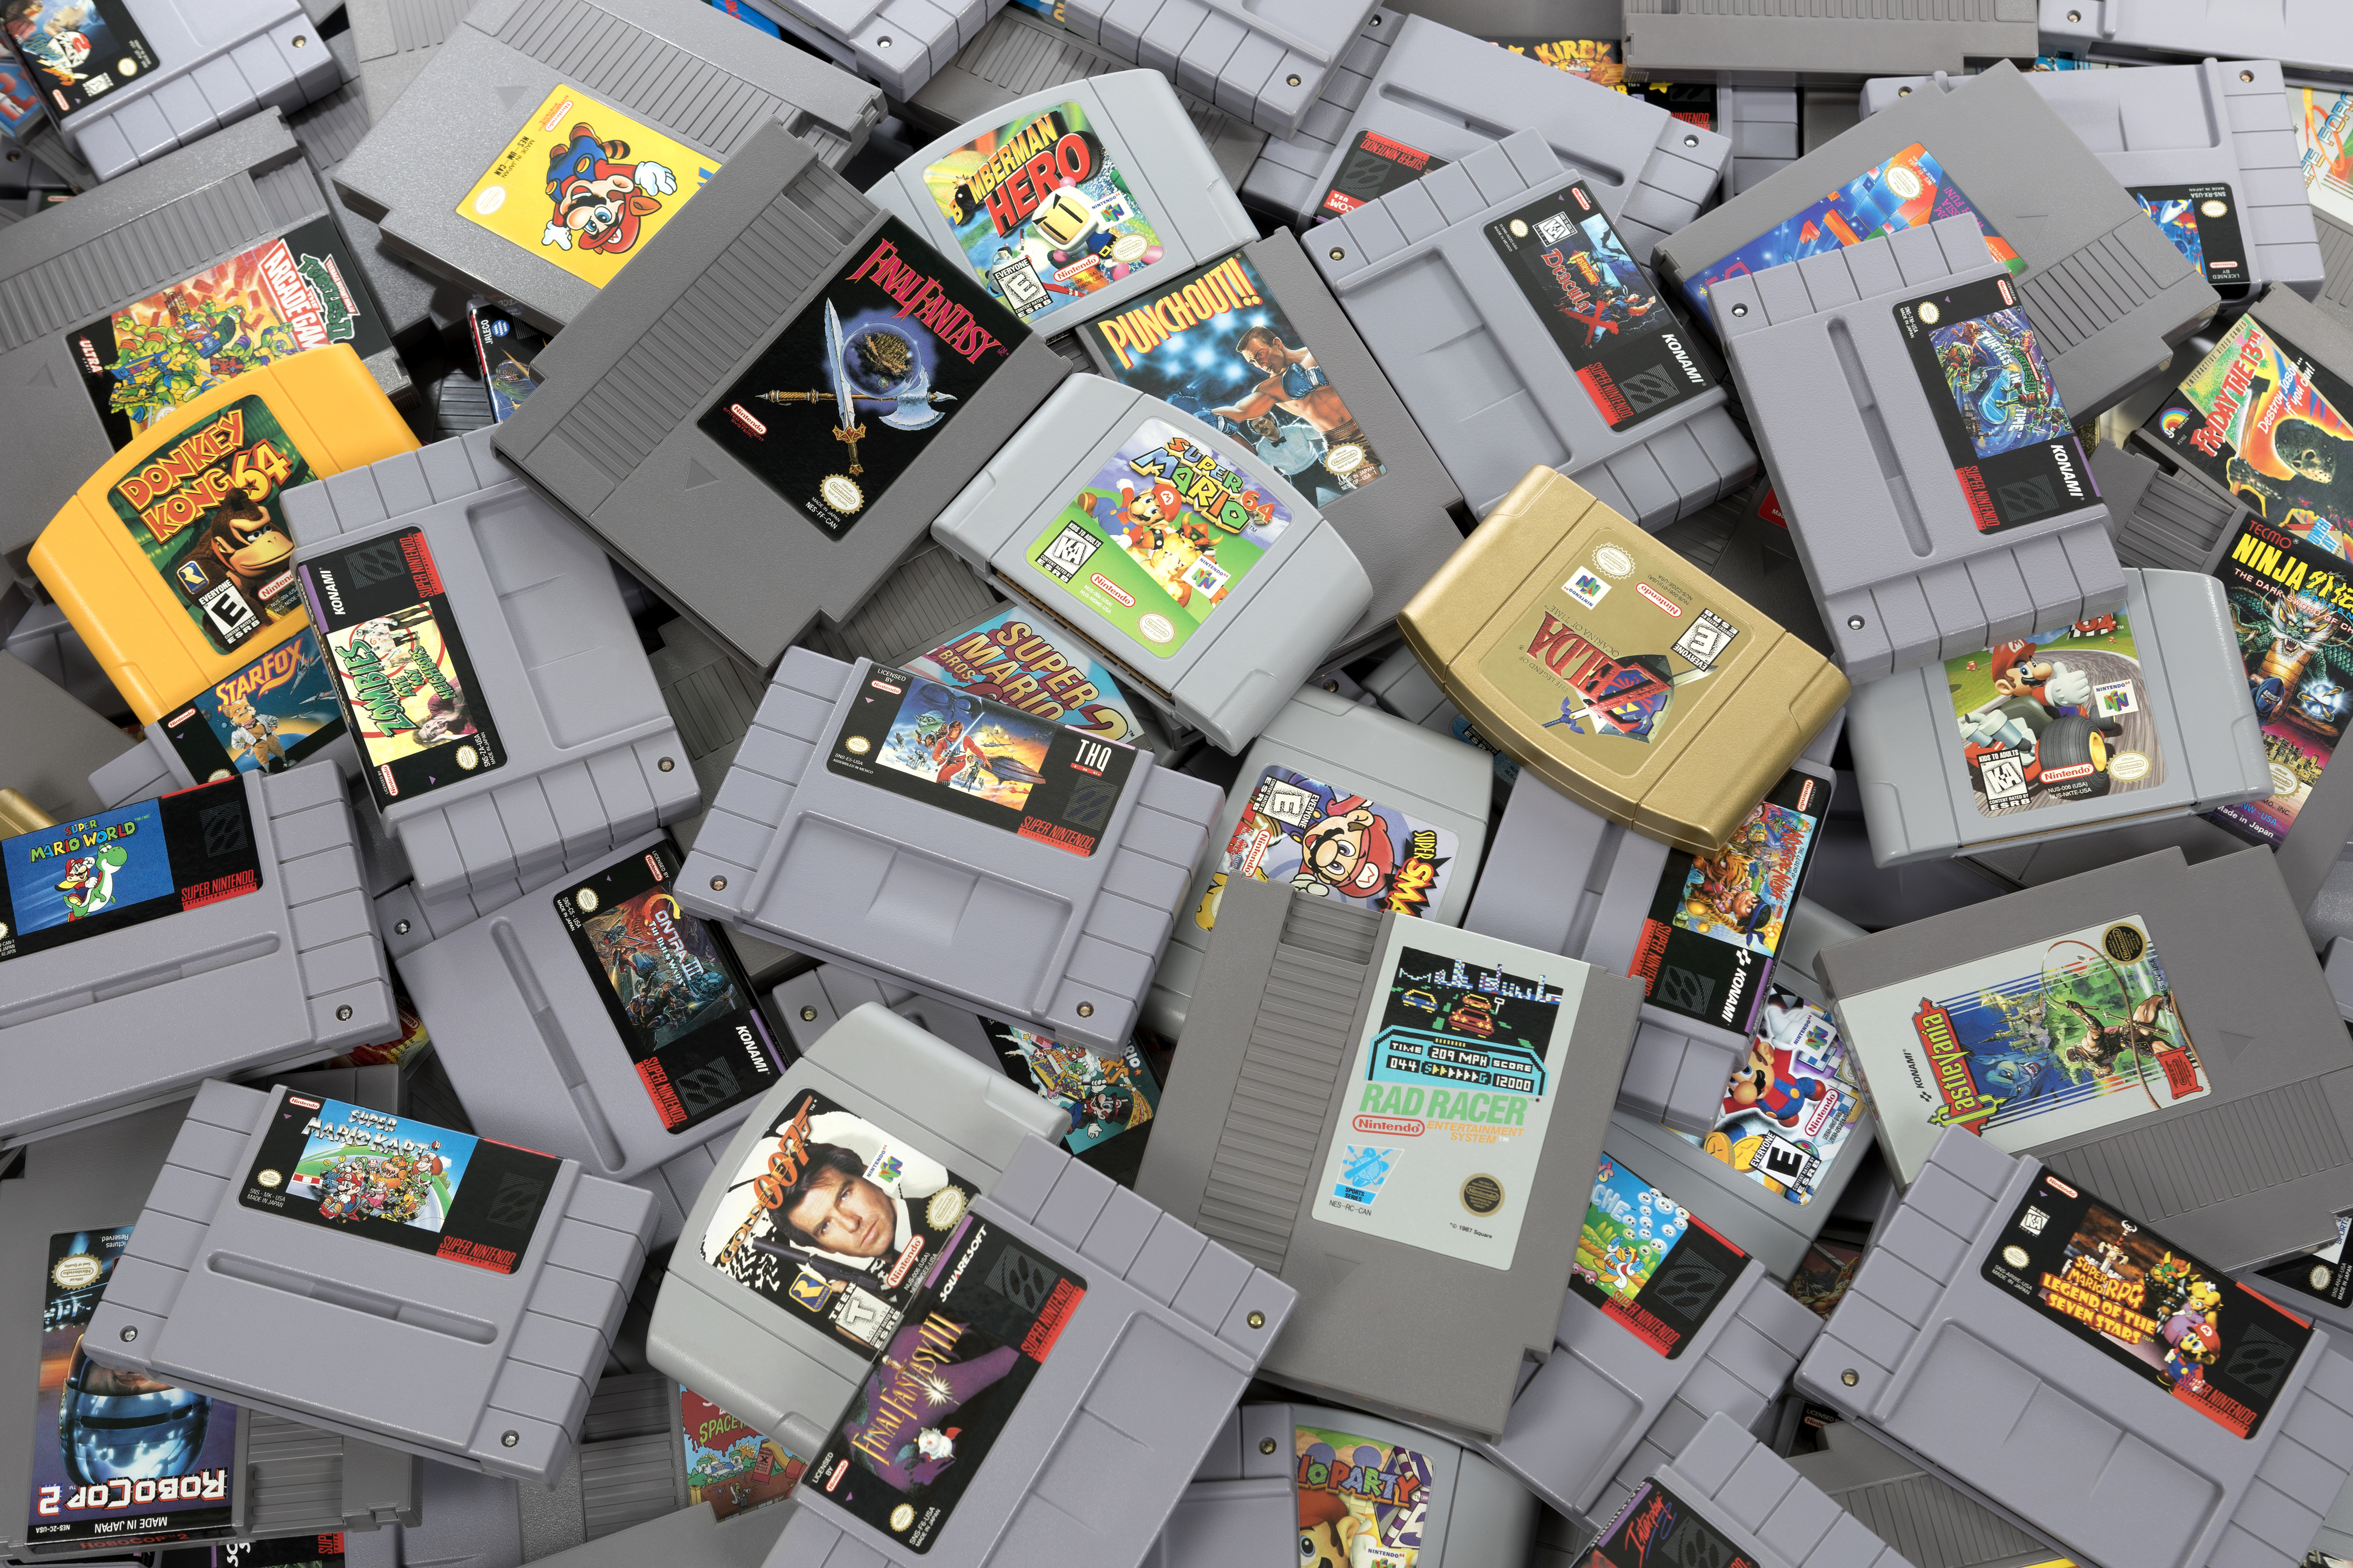 A large pile of various retro video game cartridges from the 1990s, including titles like Super Mario, Zelda, and Donkey Kong